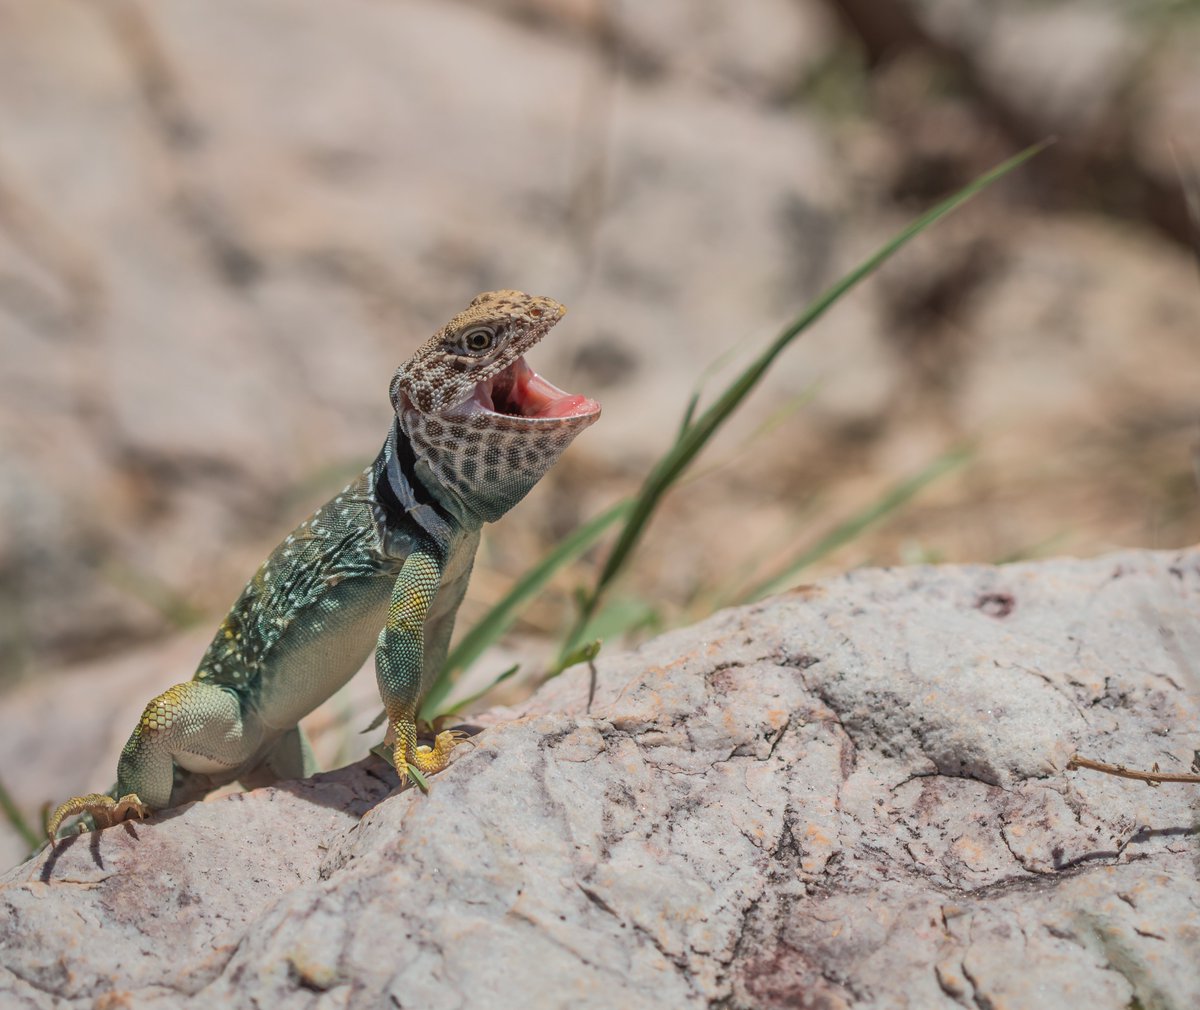 I'm returning as an instructor for AMNH's Field Herpetology course this year, 7/27-8/4. Come see all the Sky Islands of the Southwest have to offer (~60 species!) and stay at the legendary Southwestern Research Station. Open to everyone, please share! bit.ly/3O1RtLE